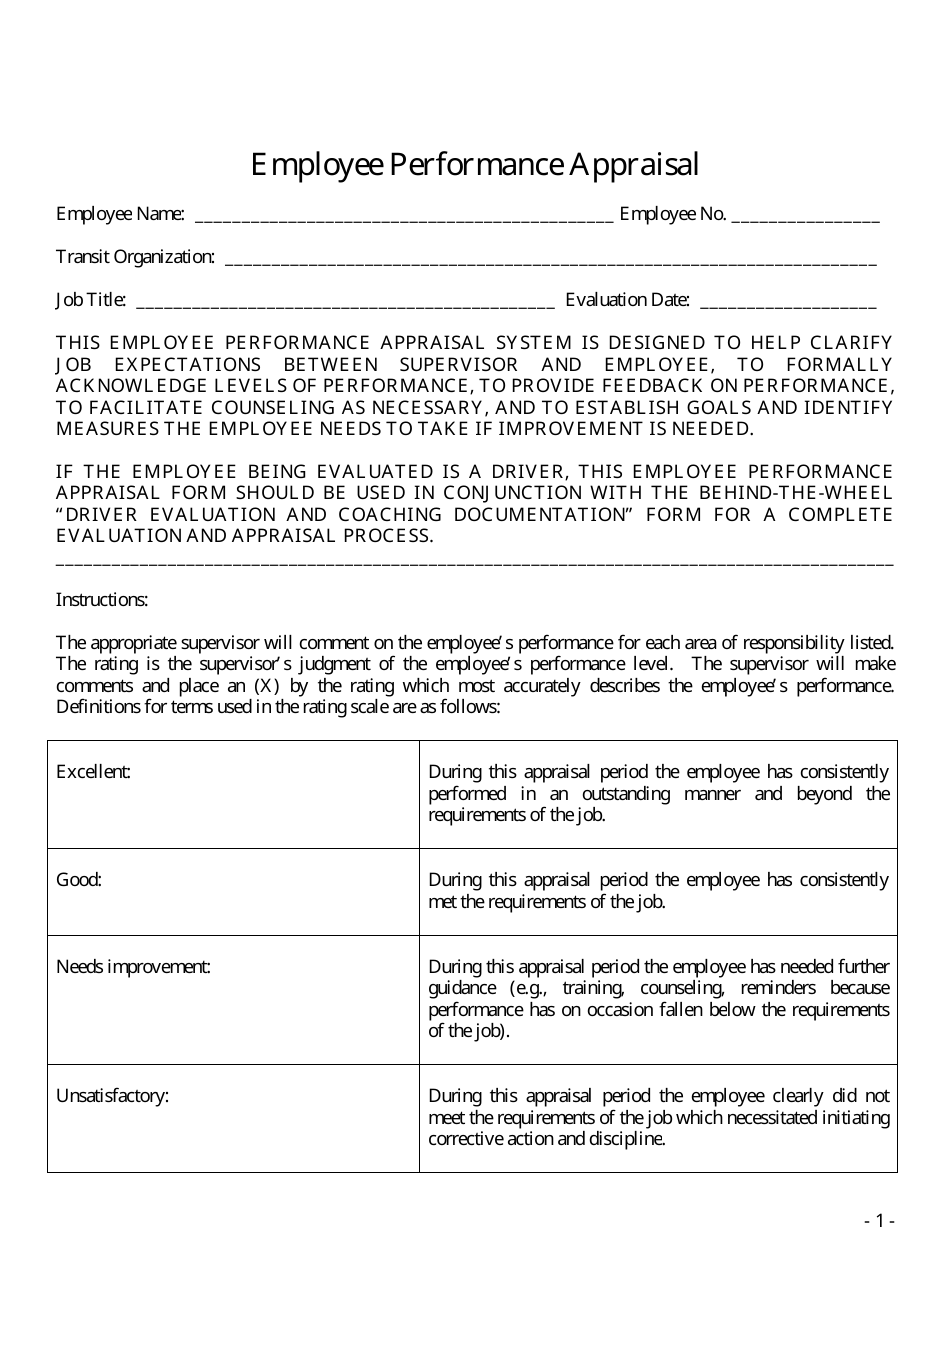 Employee Performance Appraisal Form - Big Table, Page 1